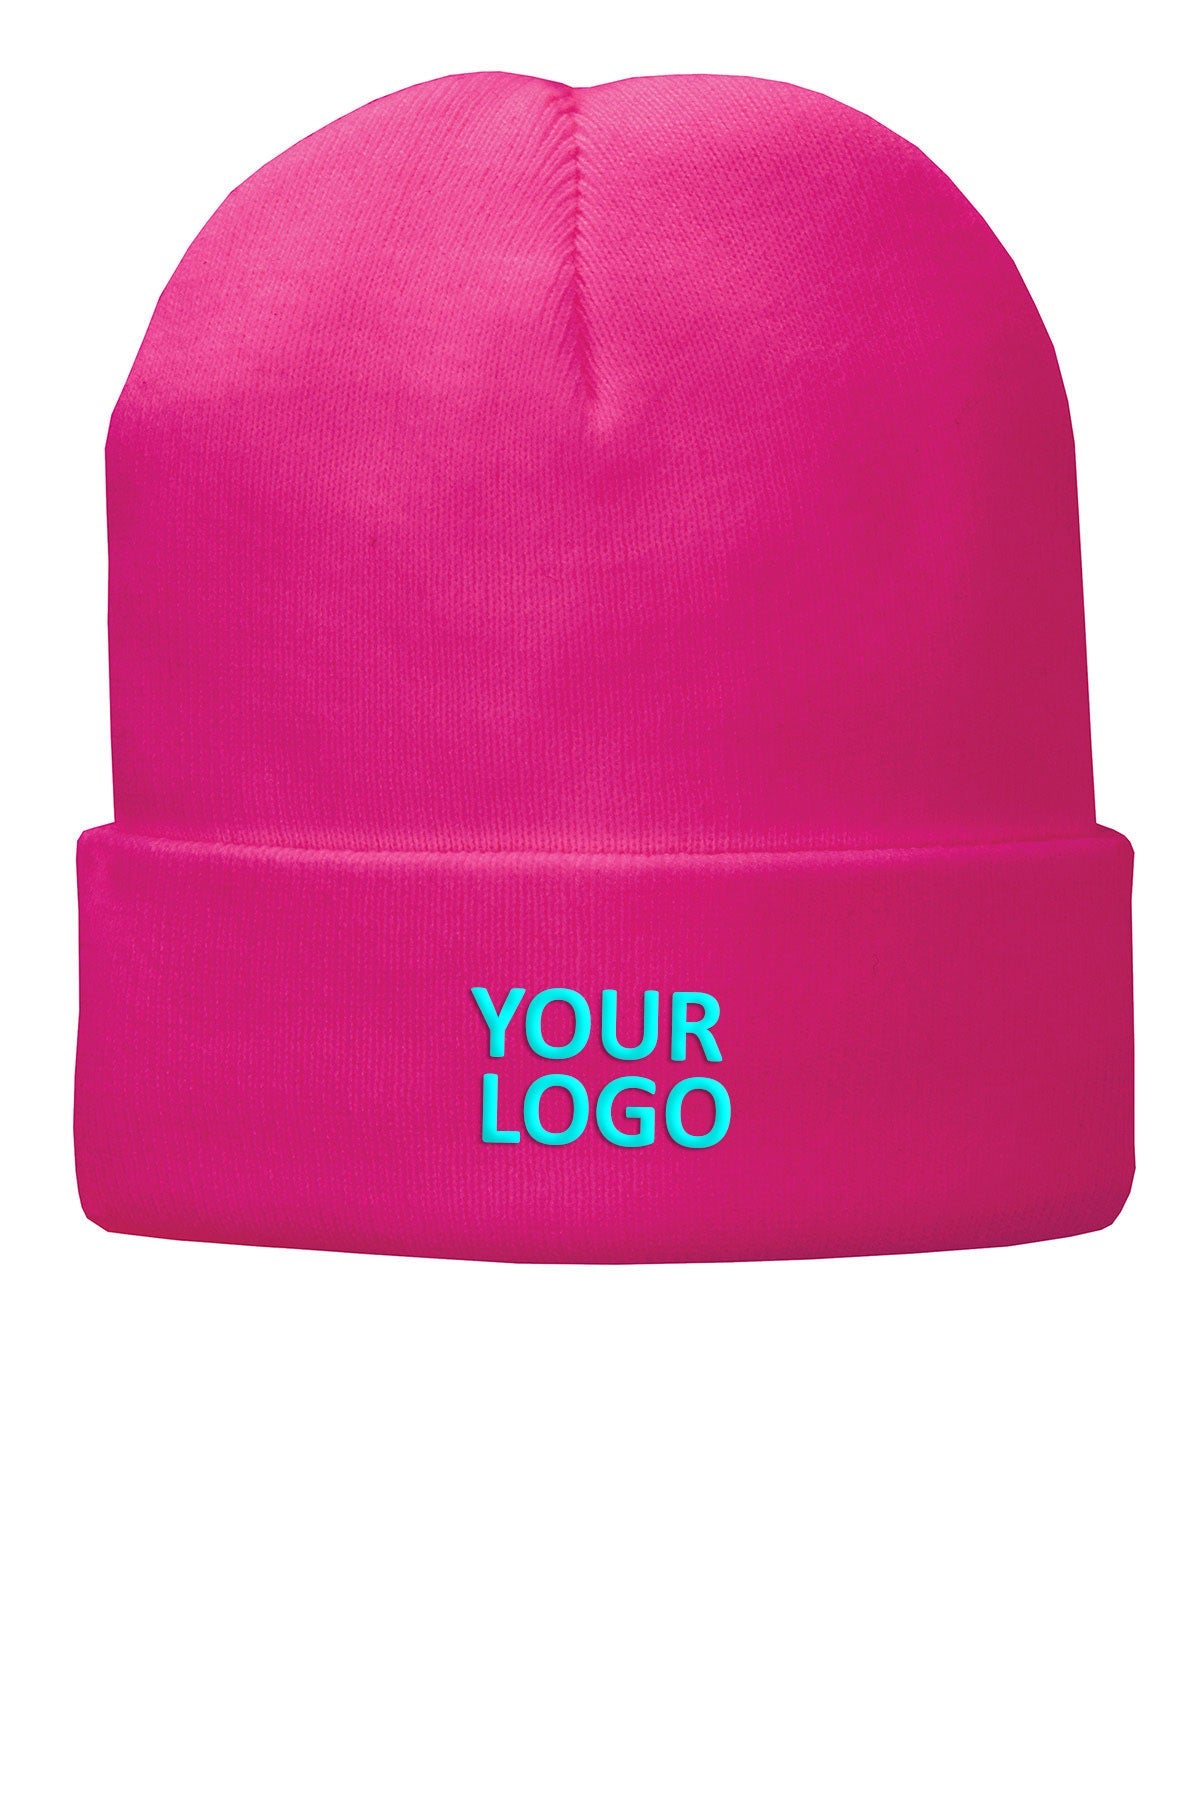 Port & Company Fleece Lined Customized Knit Caps, Neon Pink Glo